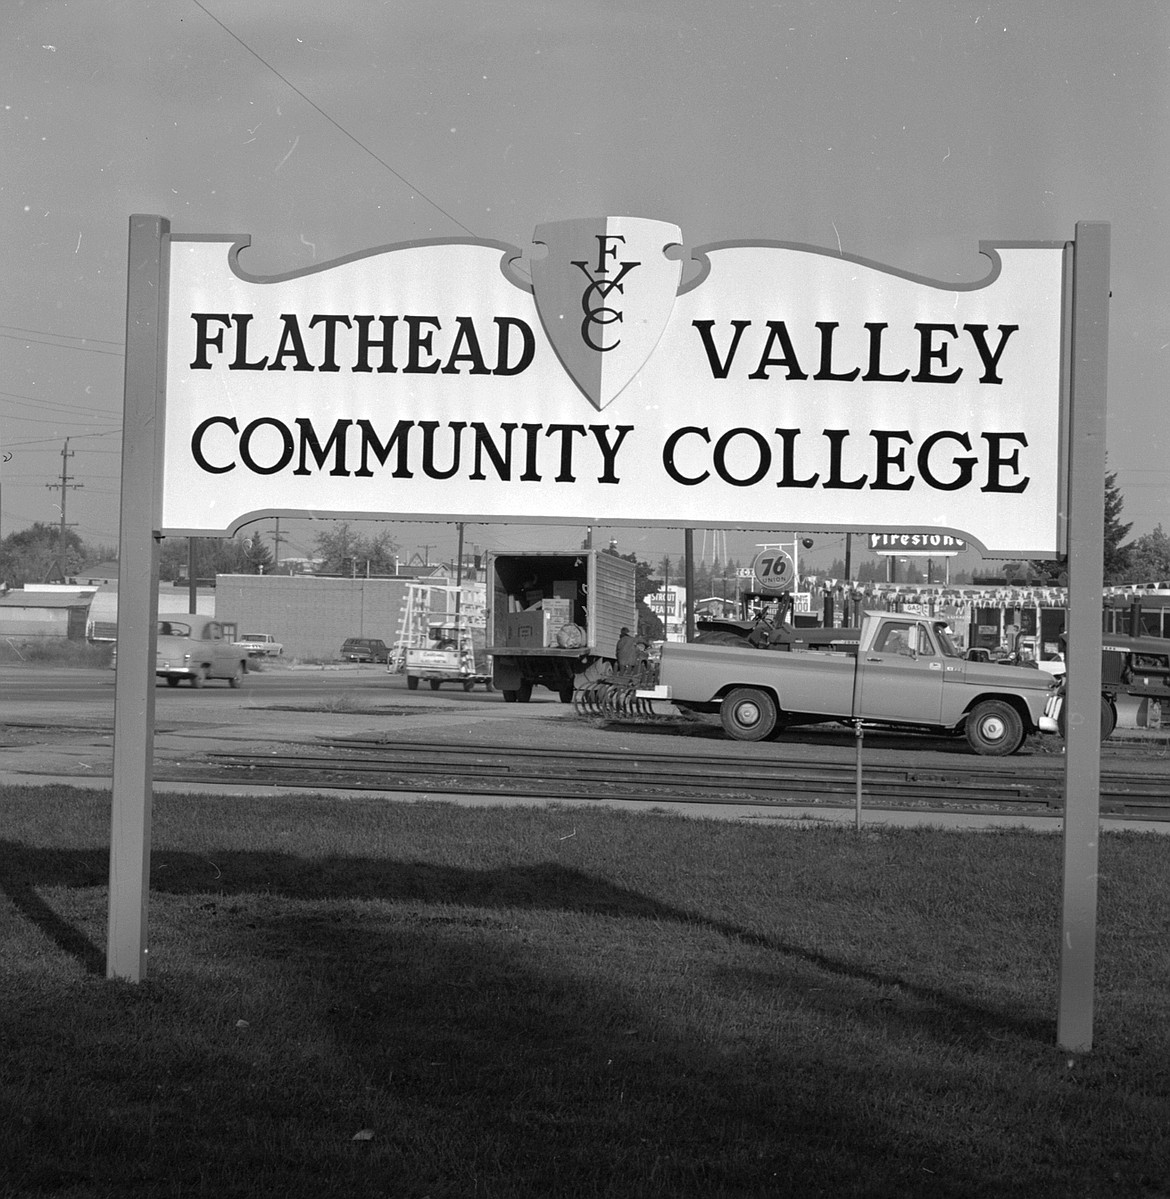 The original sign in 1967 for Flathead Valley Community College outside the old depot building where the school was headquartered. The view is looking north across the railroad tracks. (Inter Lake file photos)